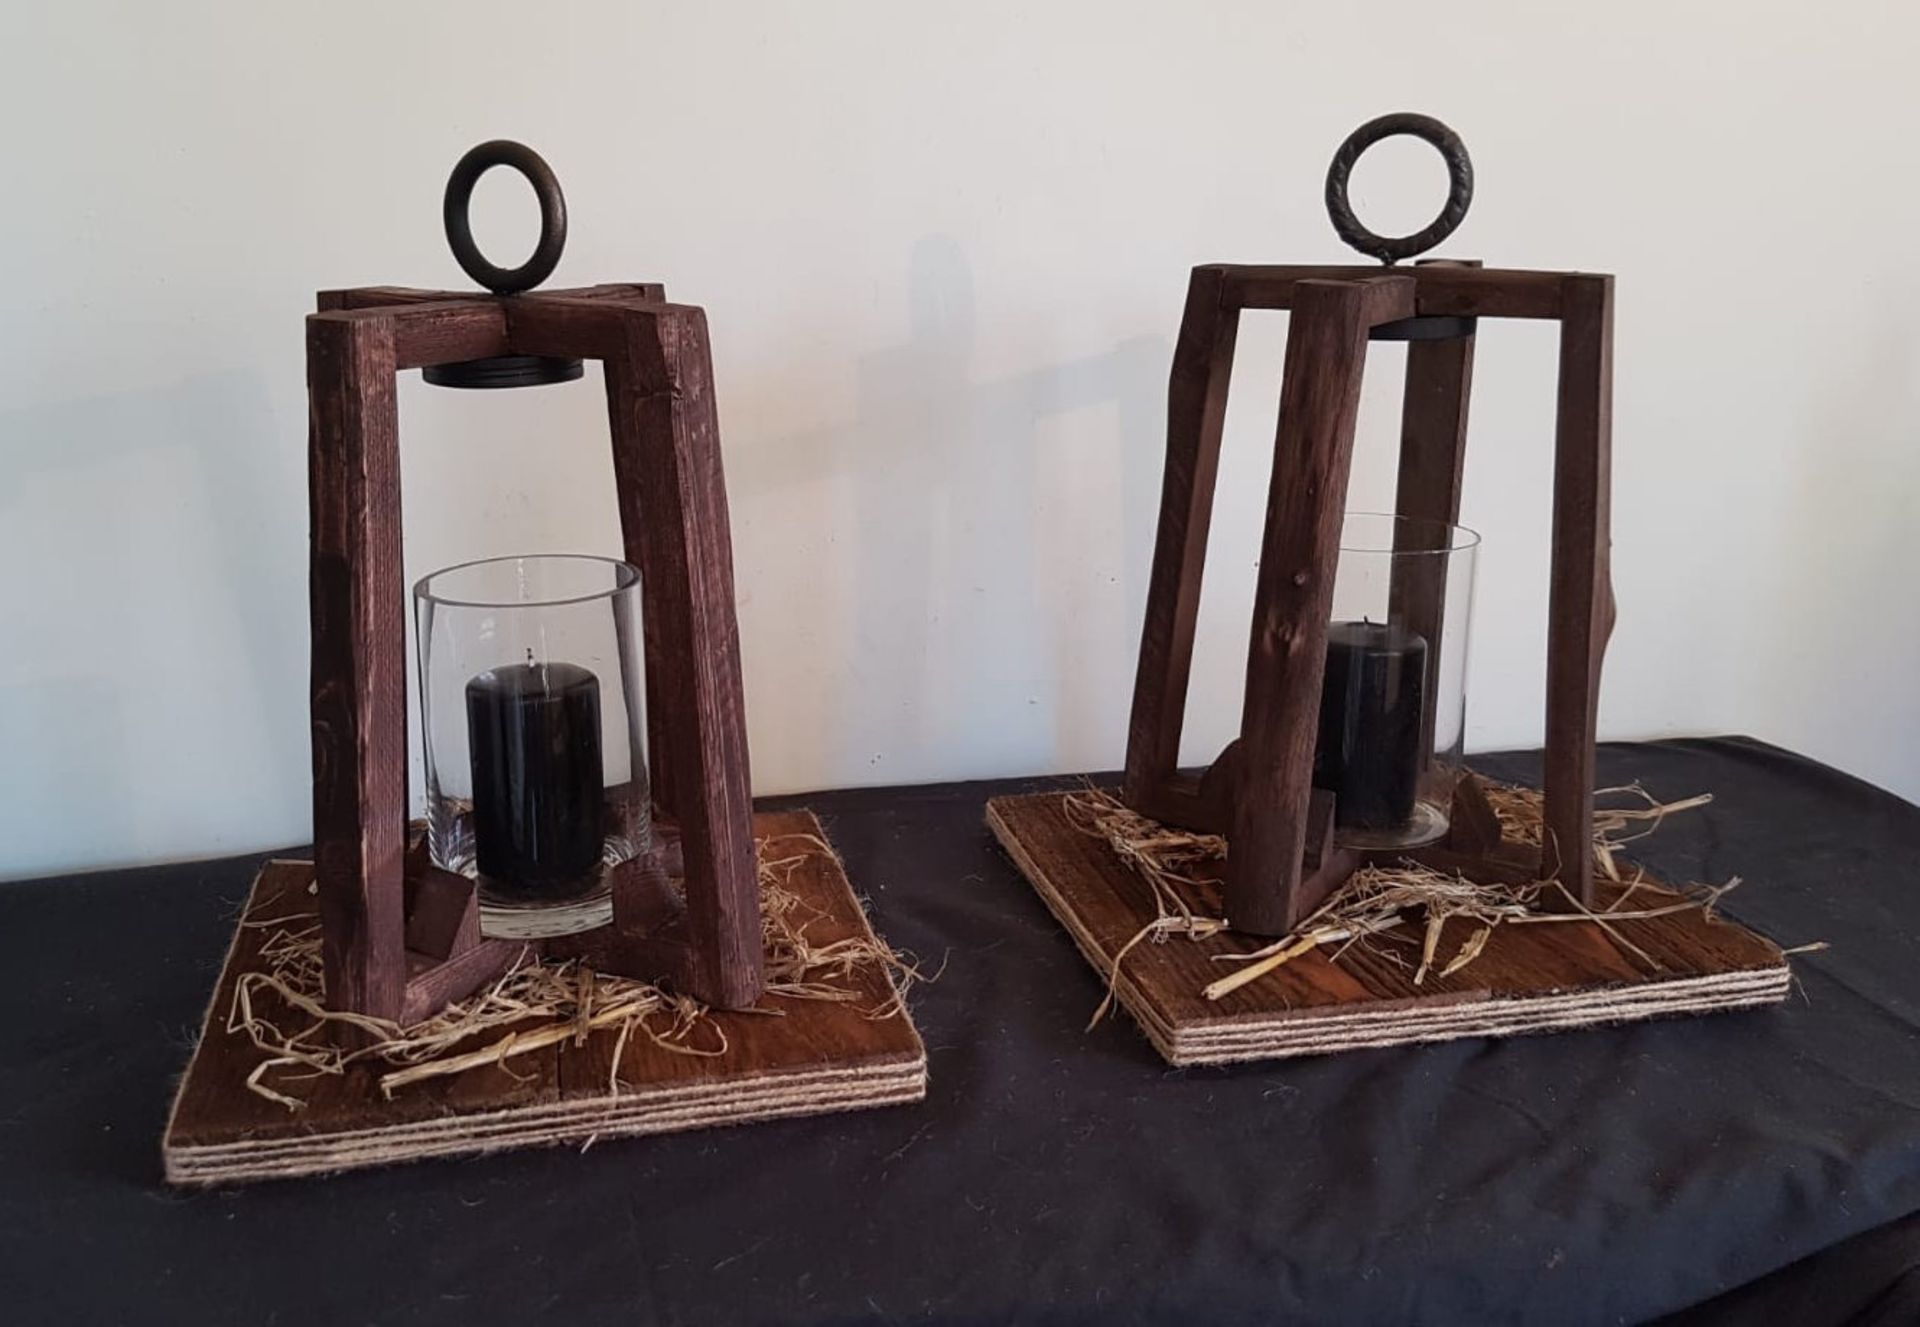 10 x Assorted Bespoke Wooden Rustic Lanterns - Ref: Lot 55 - CL548 - Location: Leicester LE4All - Image 2 of 2